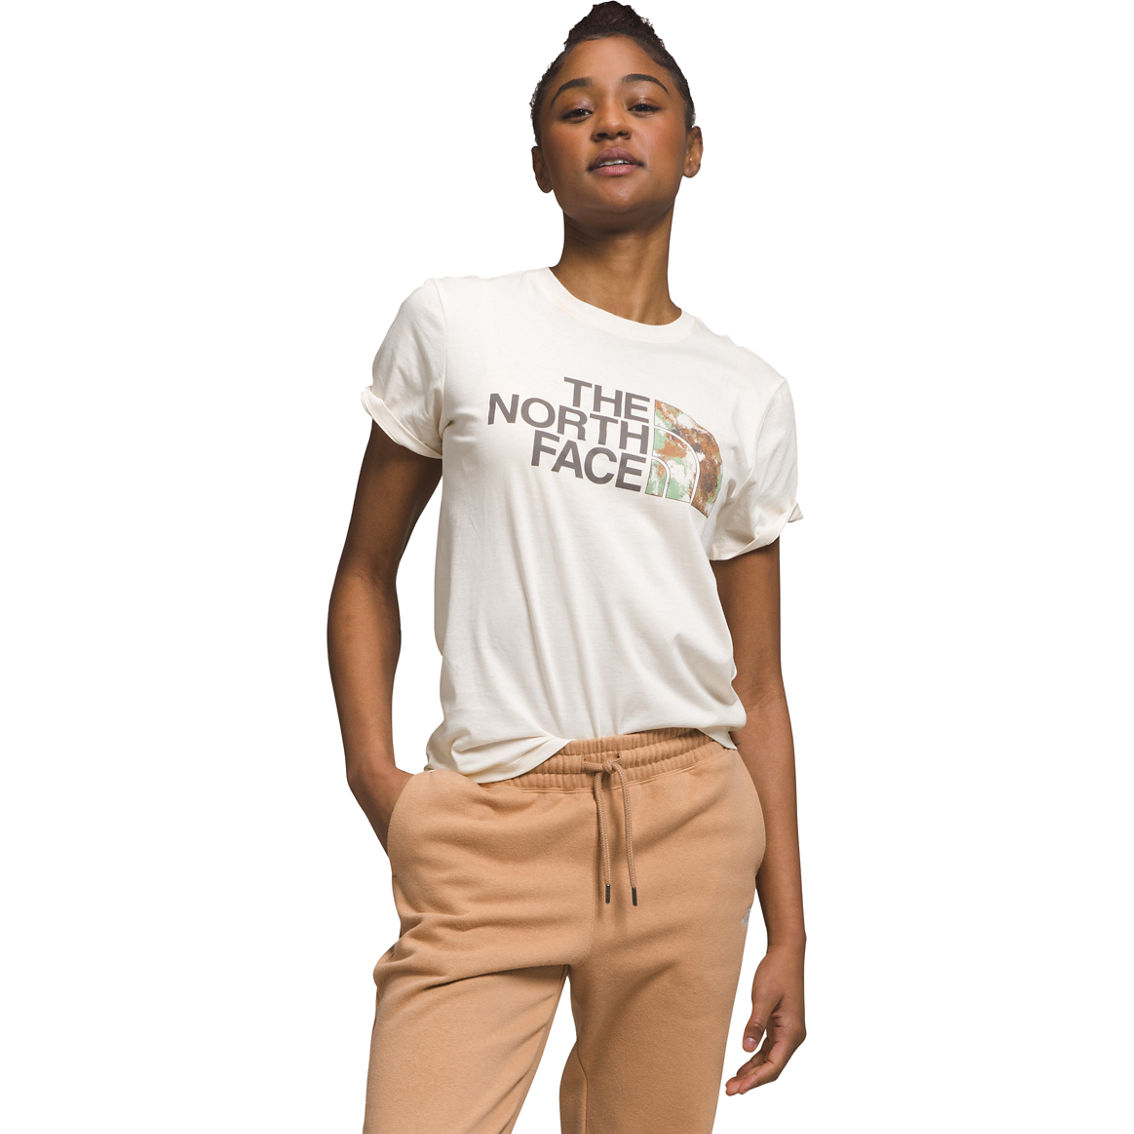 The North Face Half Dome Tee | Tops | Clothing & Accessories